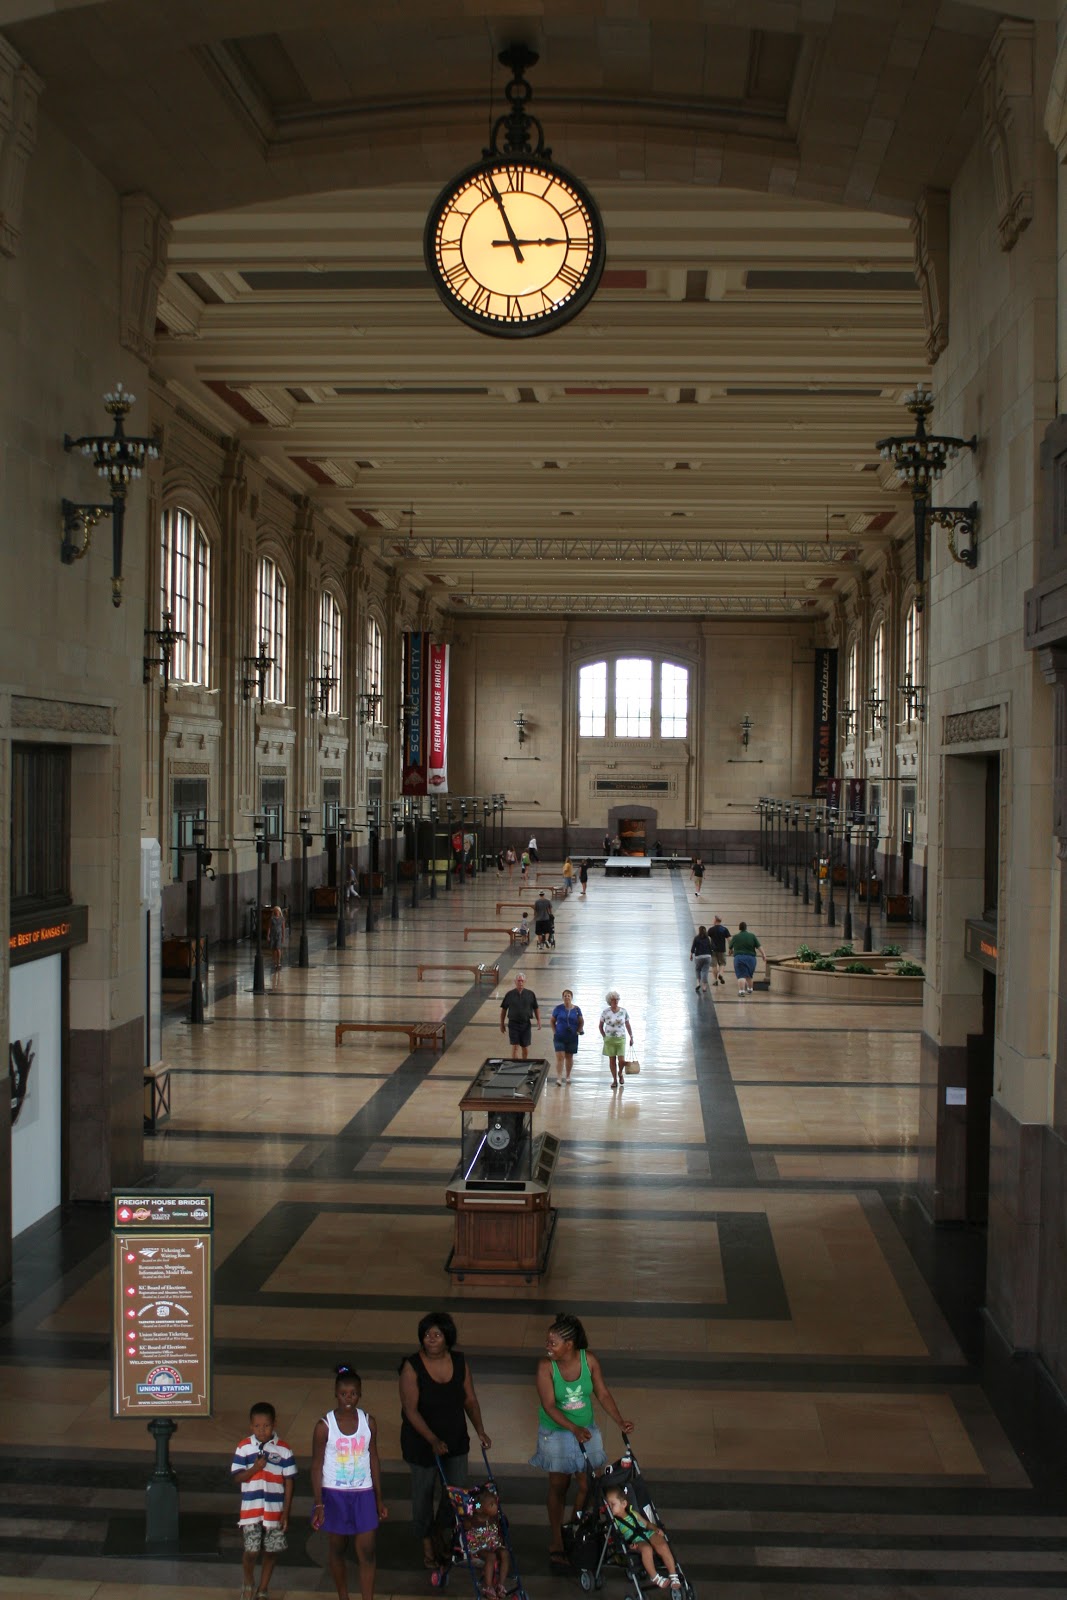 What a Country! Union Station at Kansas City